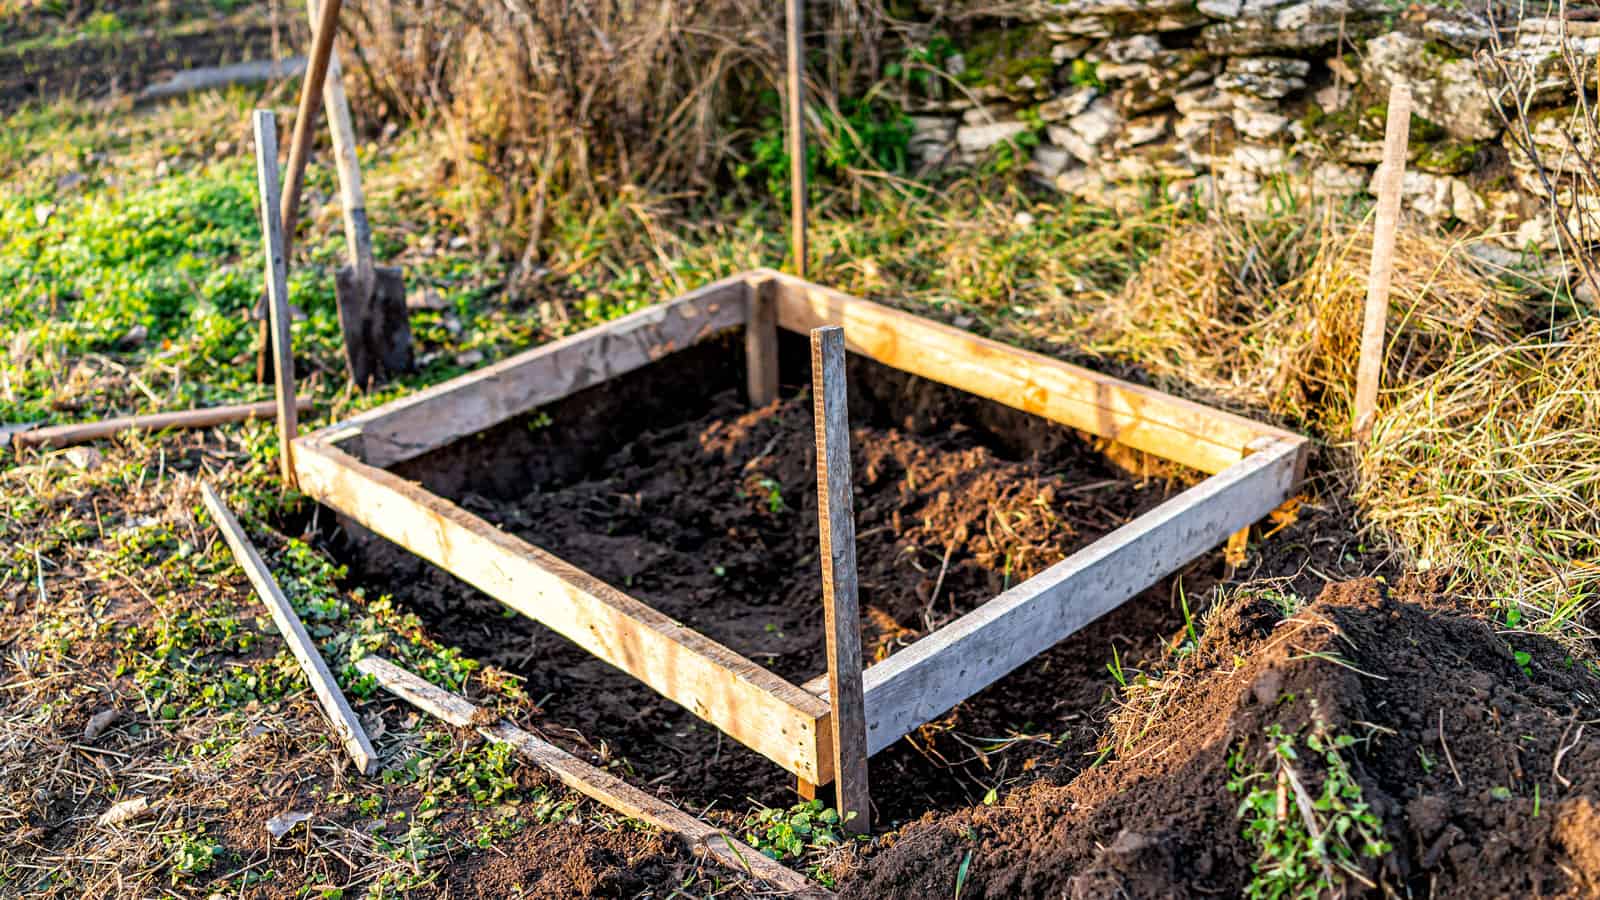 An unfinished DIY cold frame in the garden